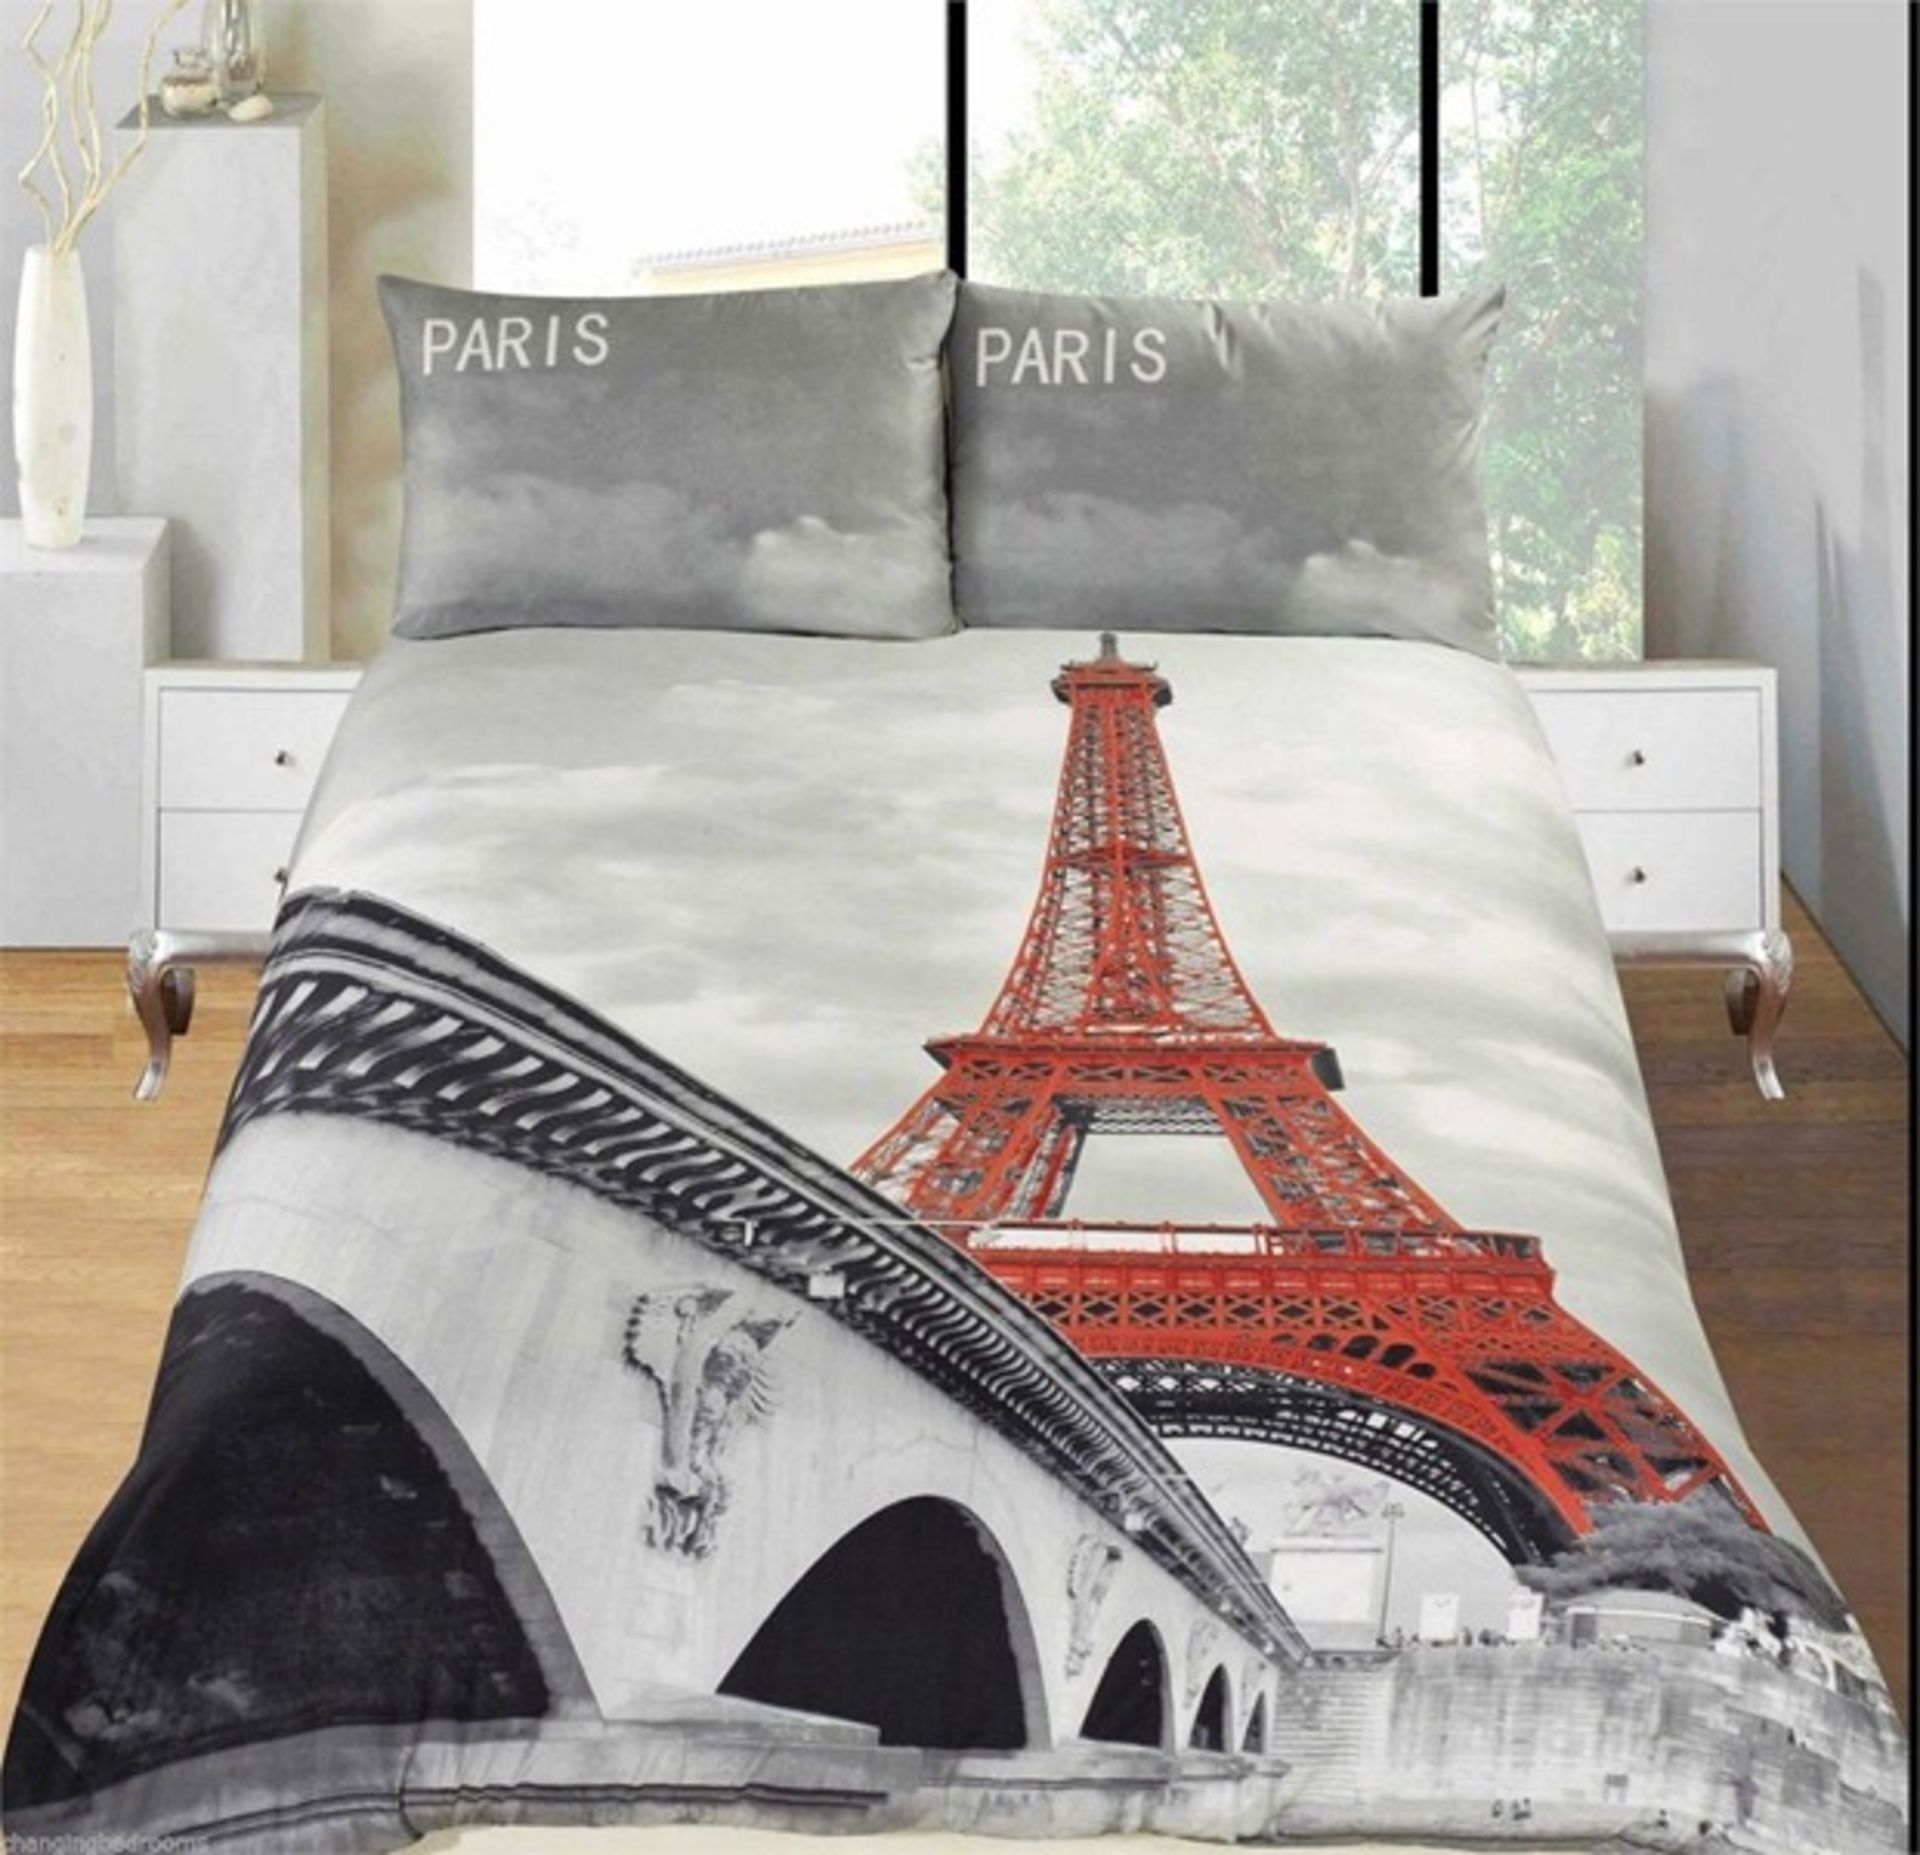 V *TRADE QTY* Brand New 3 Piece Luxury King Size Duvet Set Incl 2 Pillow Cases In Paris Pattern